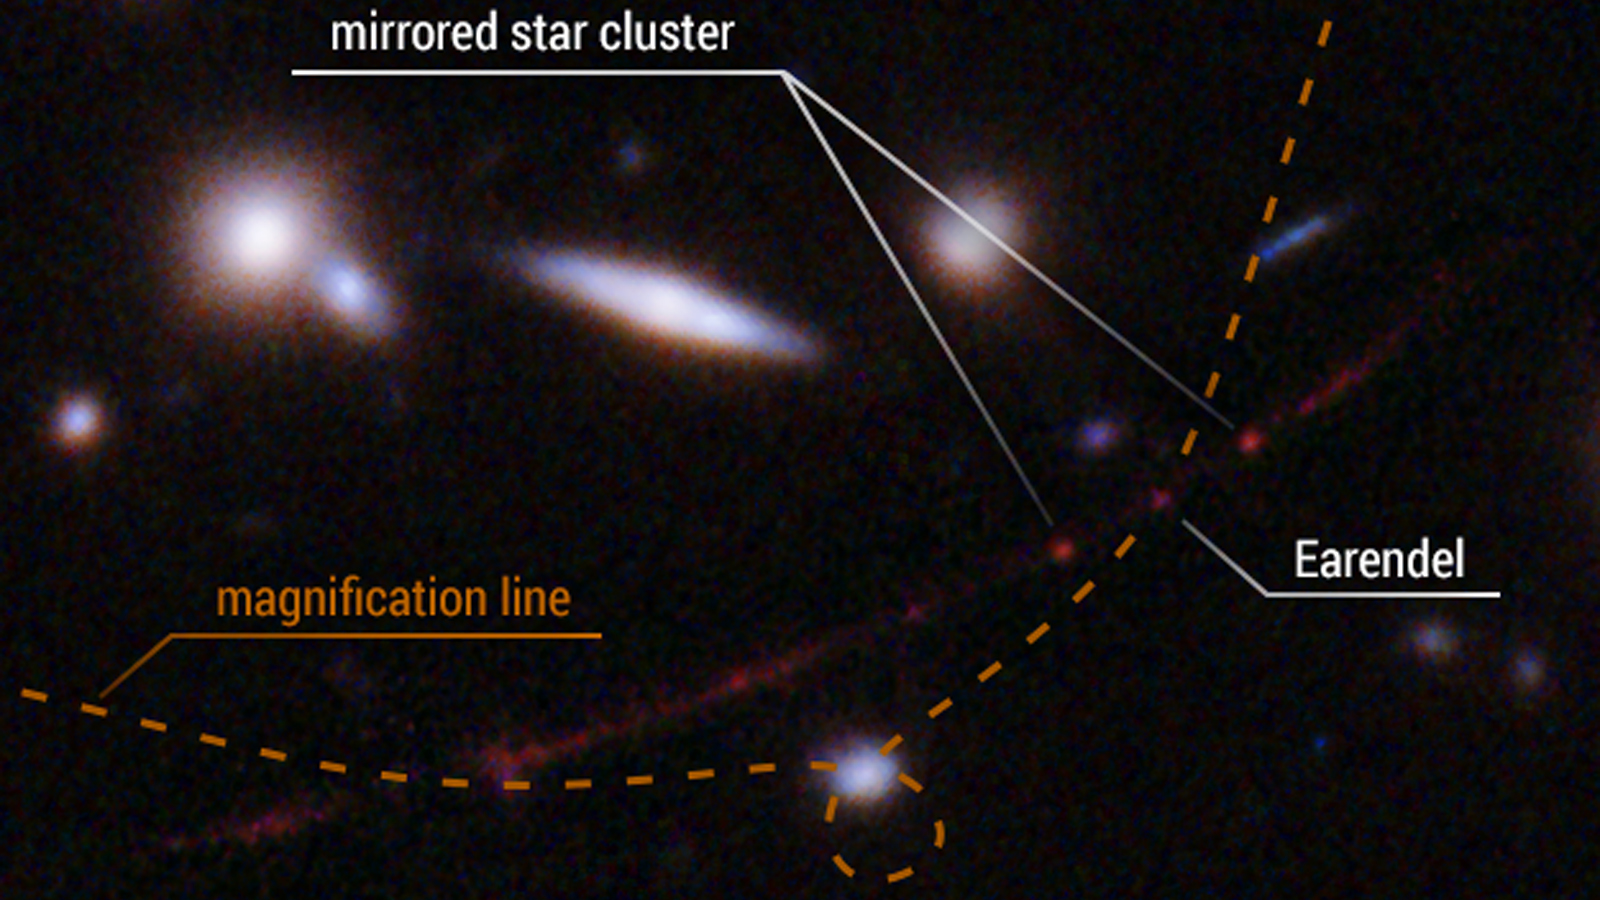 This detailed view shows the location of the distant star Earendel in a ripple in space-time (dotted line) that magnified it so that the Hubble Space Telescope could see it from 12.9 billion light-years away.